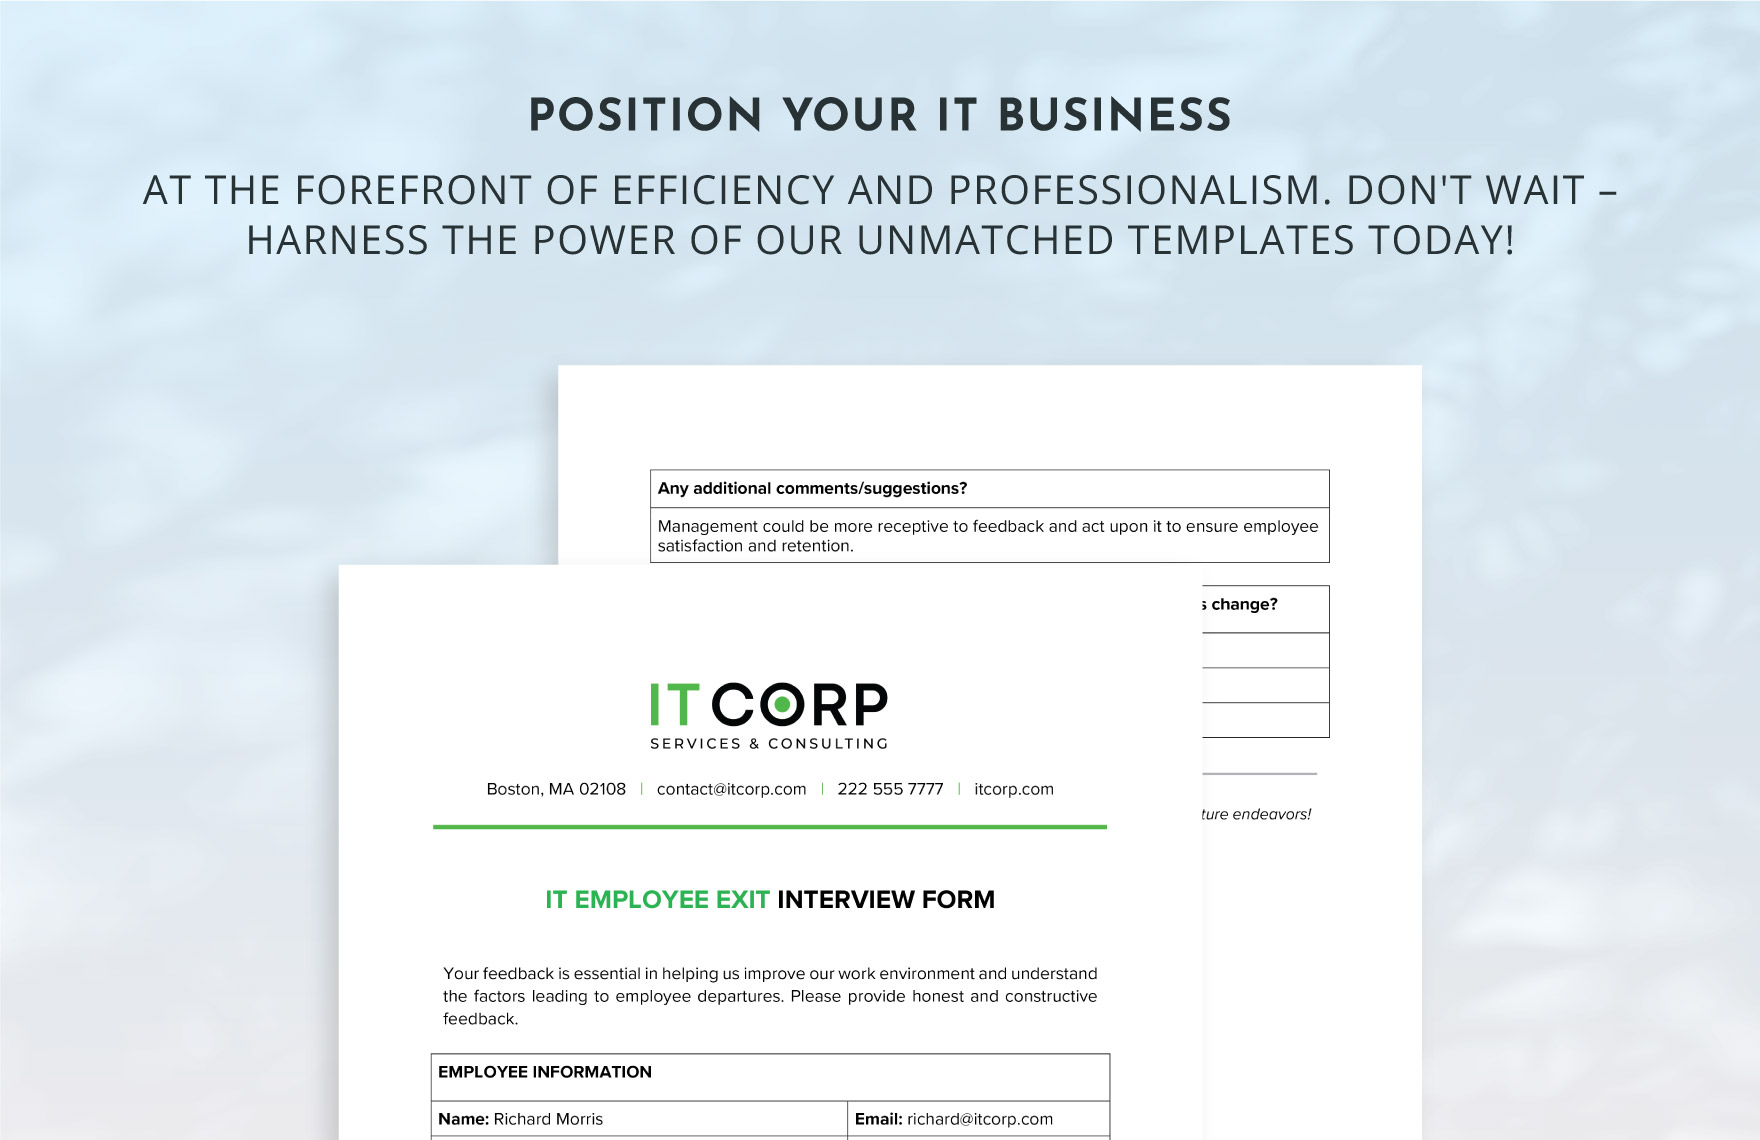 IT Employee Exit Interview Form Template